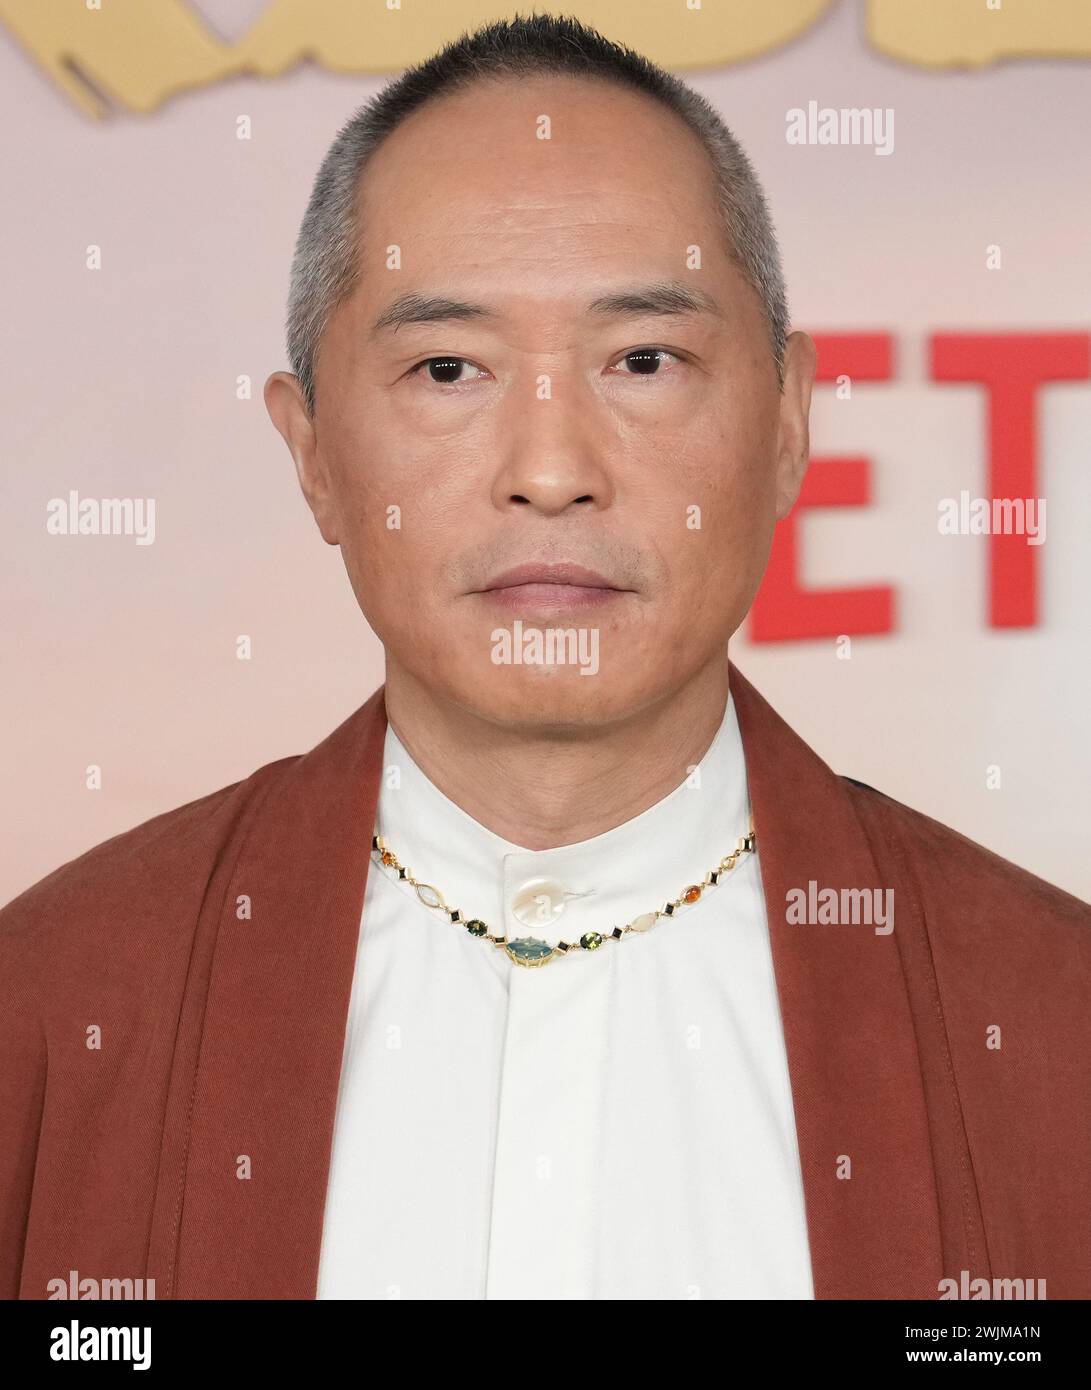 Los Angeles, USA. 15th Feb, 2024. Ken Leung arrives at the Netflix's AVATAR: THE LAST AIRBENDER World Premiere held at the Egyptian Theatre in Los Angeles, CA on Thursday, ?February 15, 2024. (Photo By Sthanlee B. Mirador/Sipa USA) Credit: Sipa USA/Alamy Live News Stock Photo